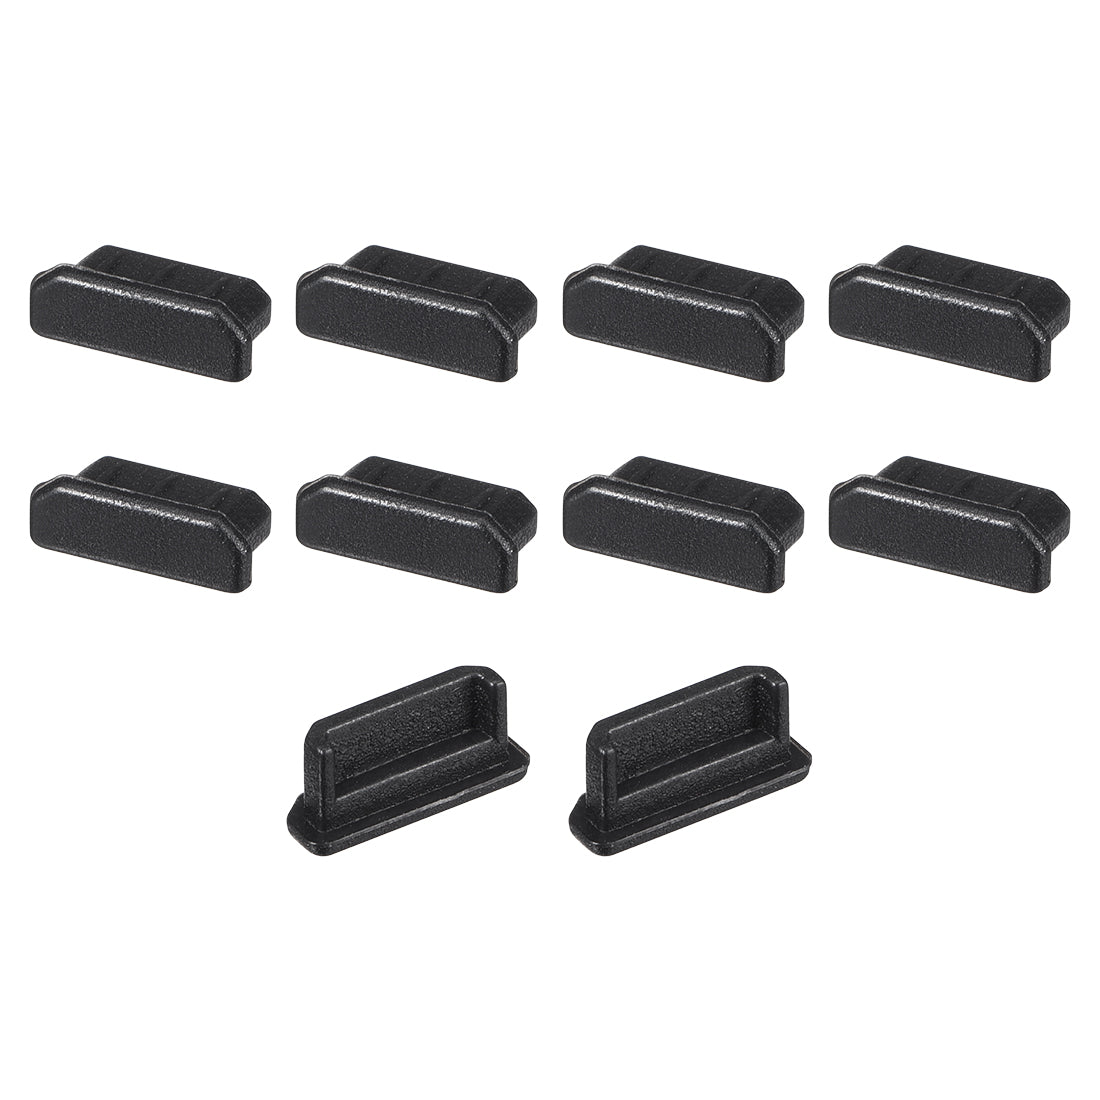 uxcell Uxcell Silicone Tablet Mini  Anti-Dust Stopper Cap Cover For Female Port Black 10pcs